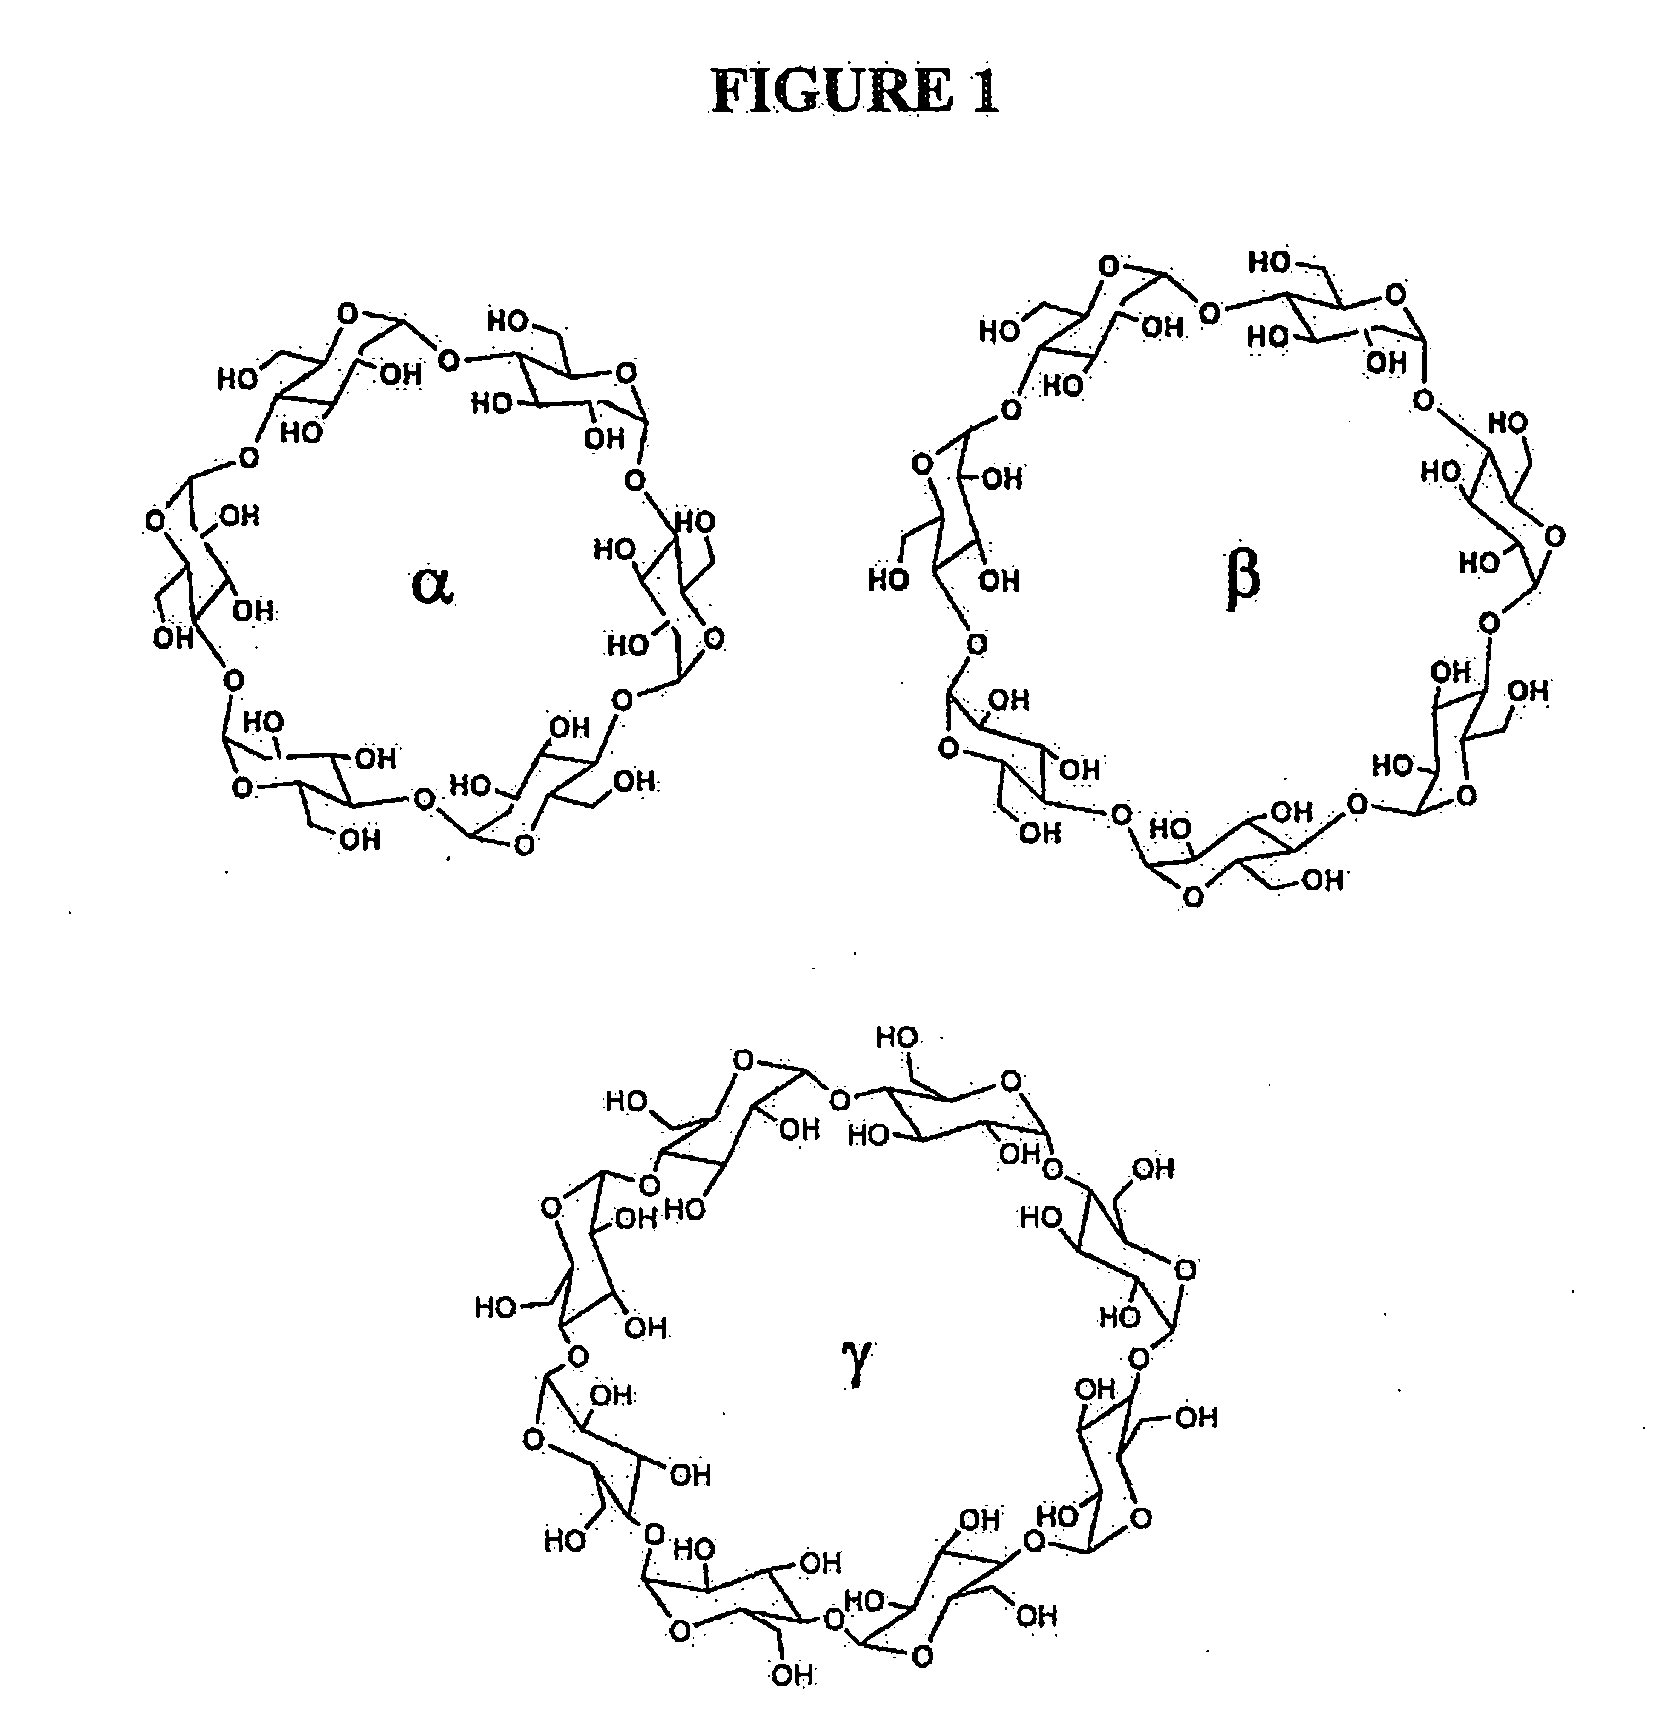 Compounds and methods for enhancing solubility of florfenicol and structurally-related antibiotics using cyclodextrins